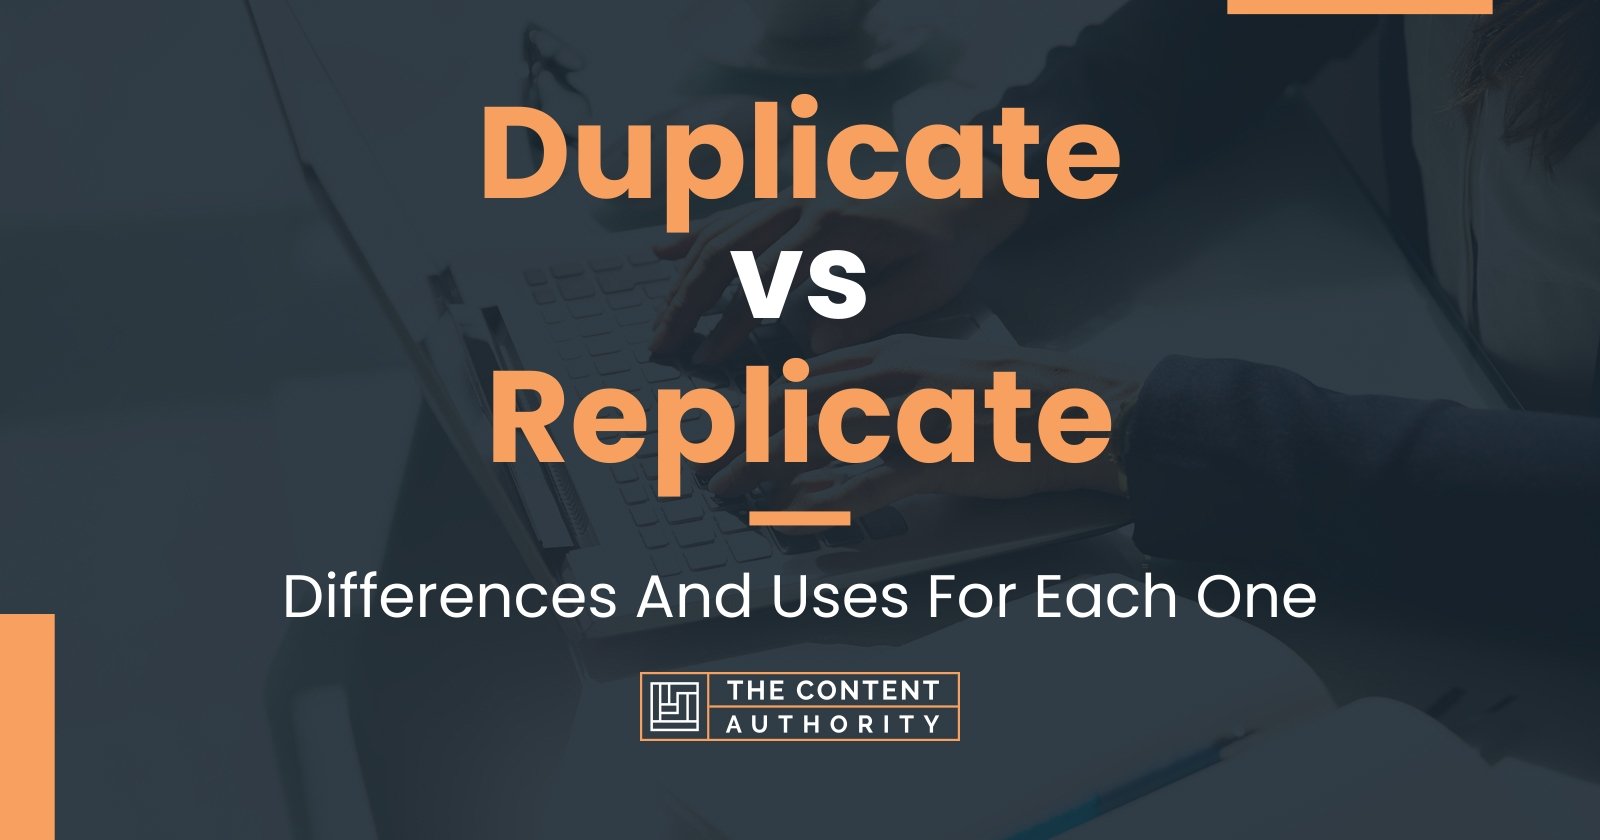 Duplicate vs Replicate: Differences And Uses For Each One